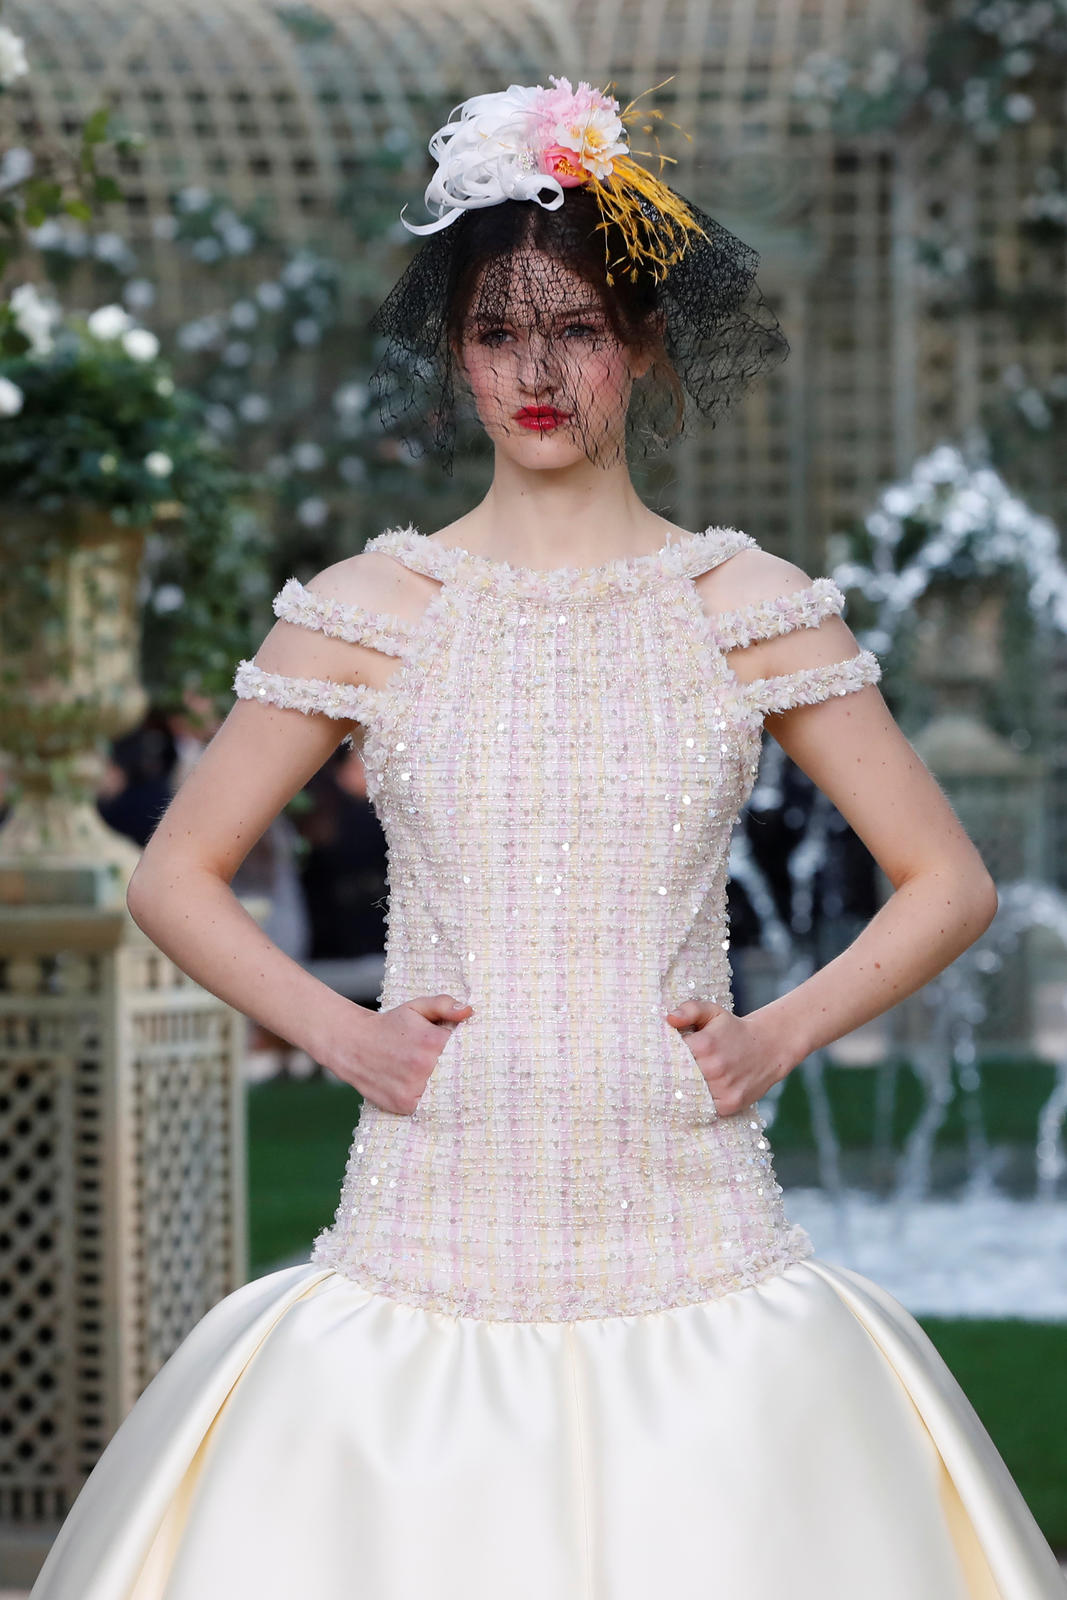 A model presents a creation by German designer Karl Lagerfeld as part of his Haute Couture Spring-Summer 2018 fashion collection for fashion house Chanel in Paris